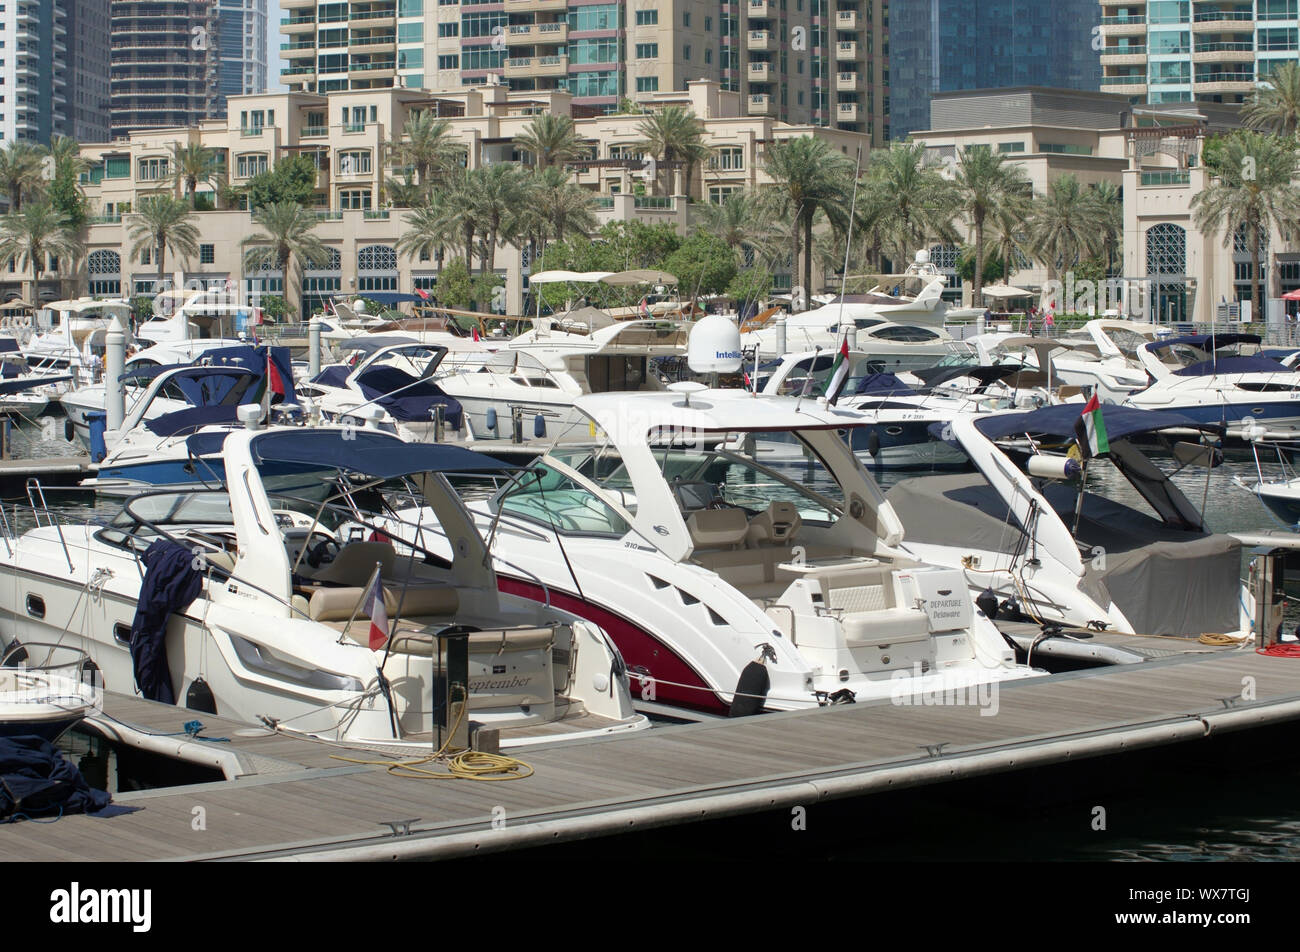 Luxury yachts and boats in the seaport Dubai Stock Photo